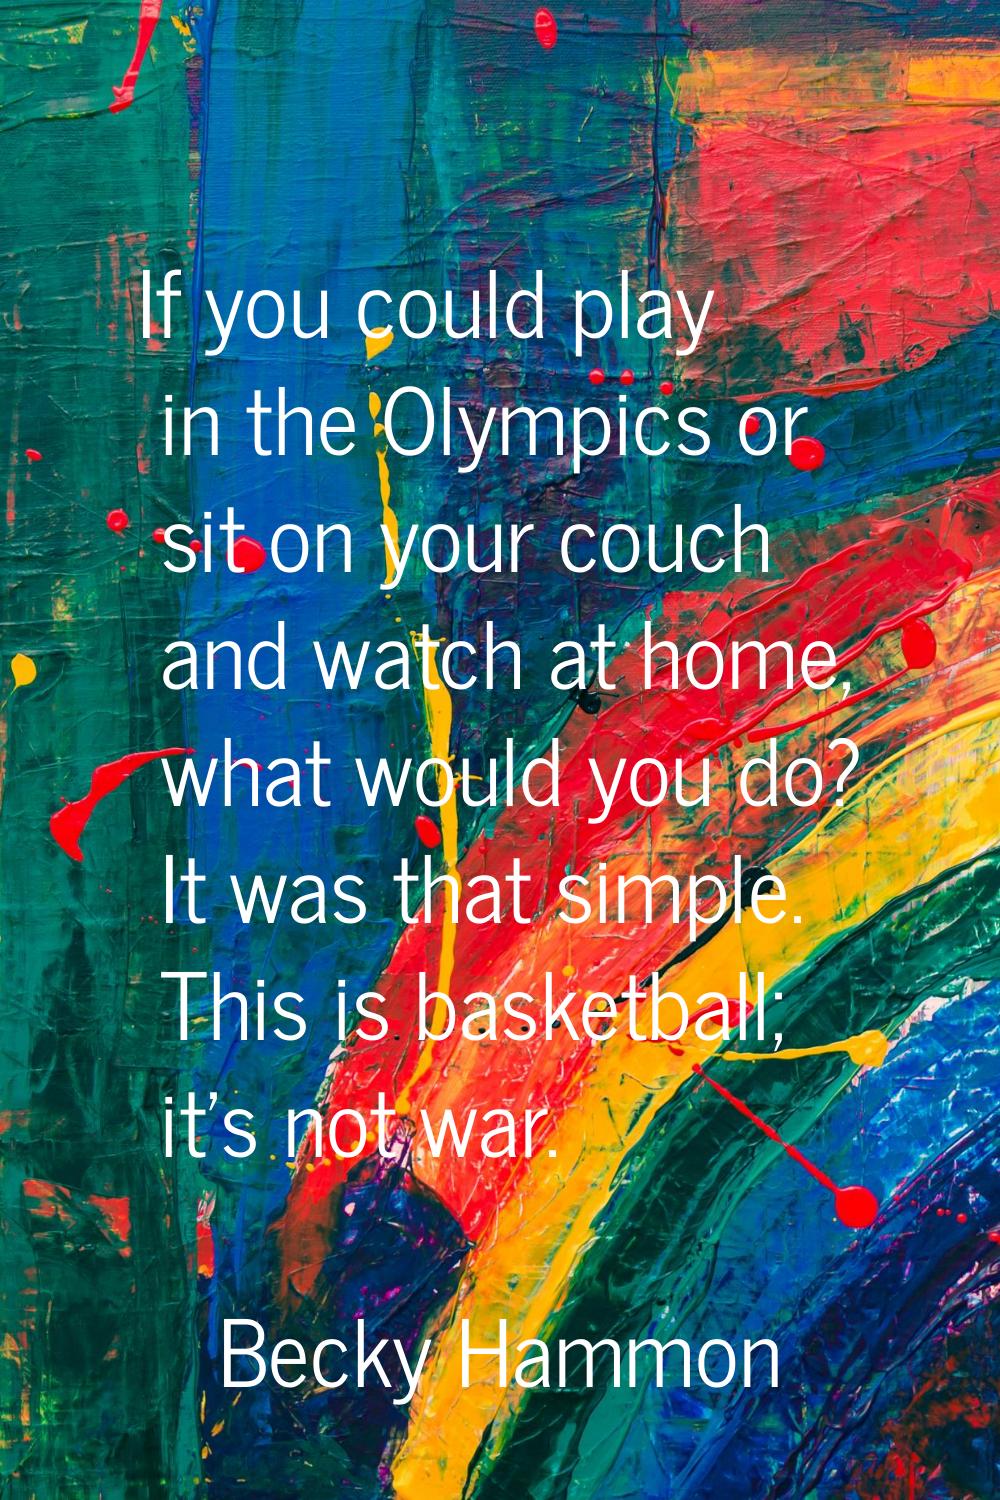 If you could play in the Olympics or sit on your couch and watch at home, what would you do? It was